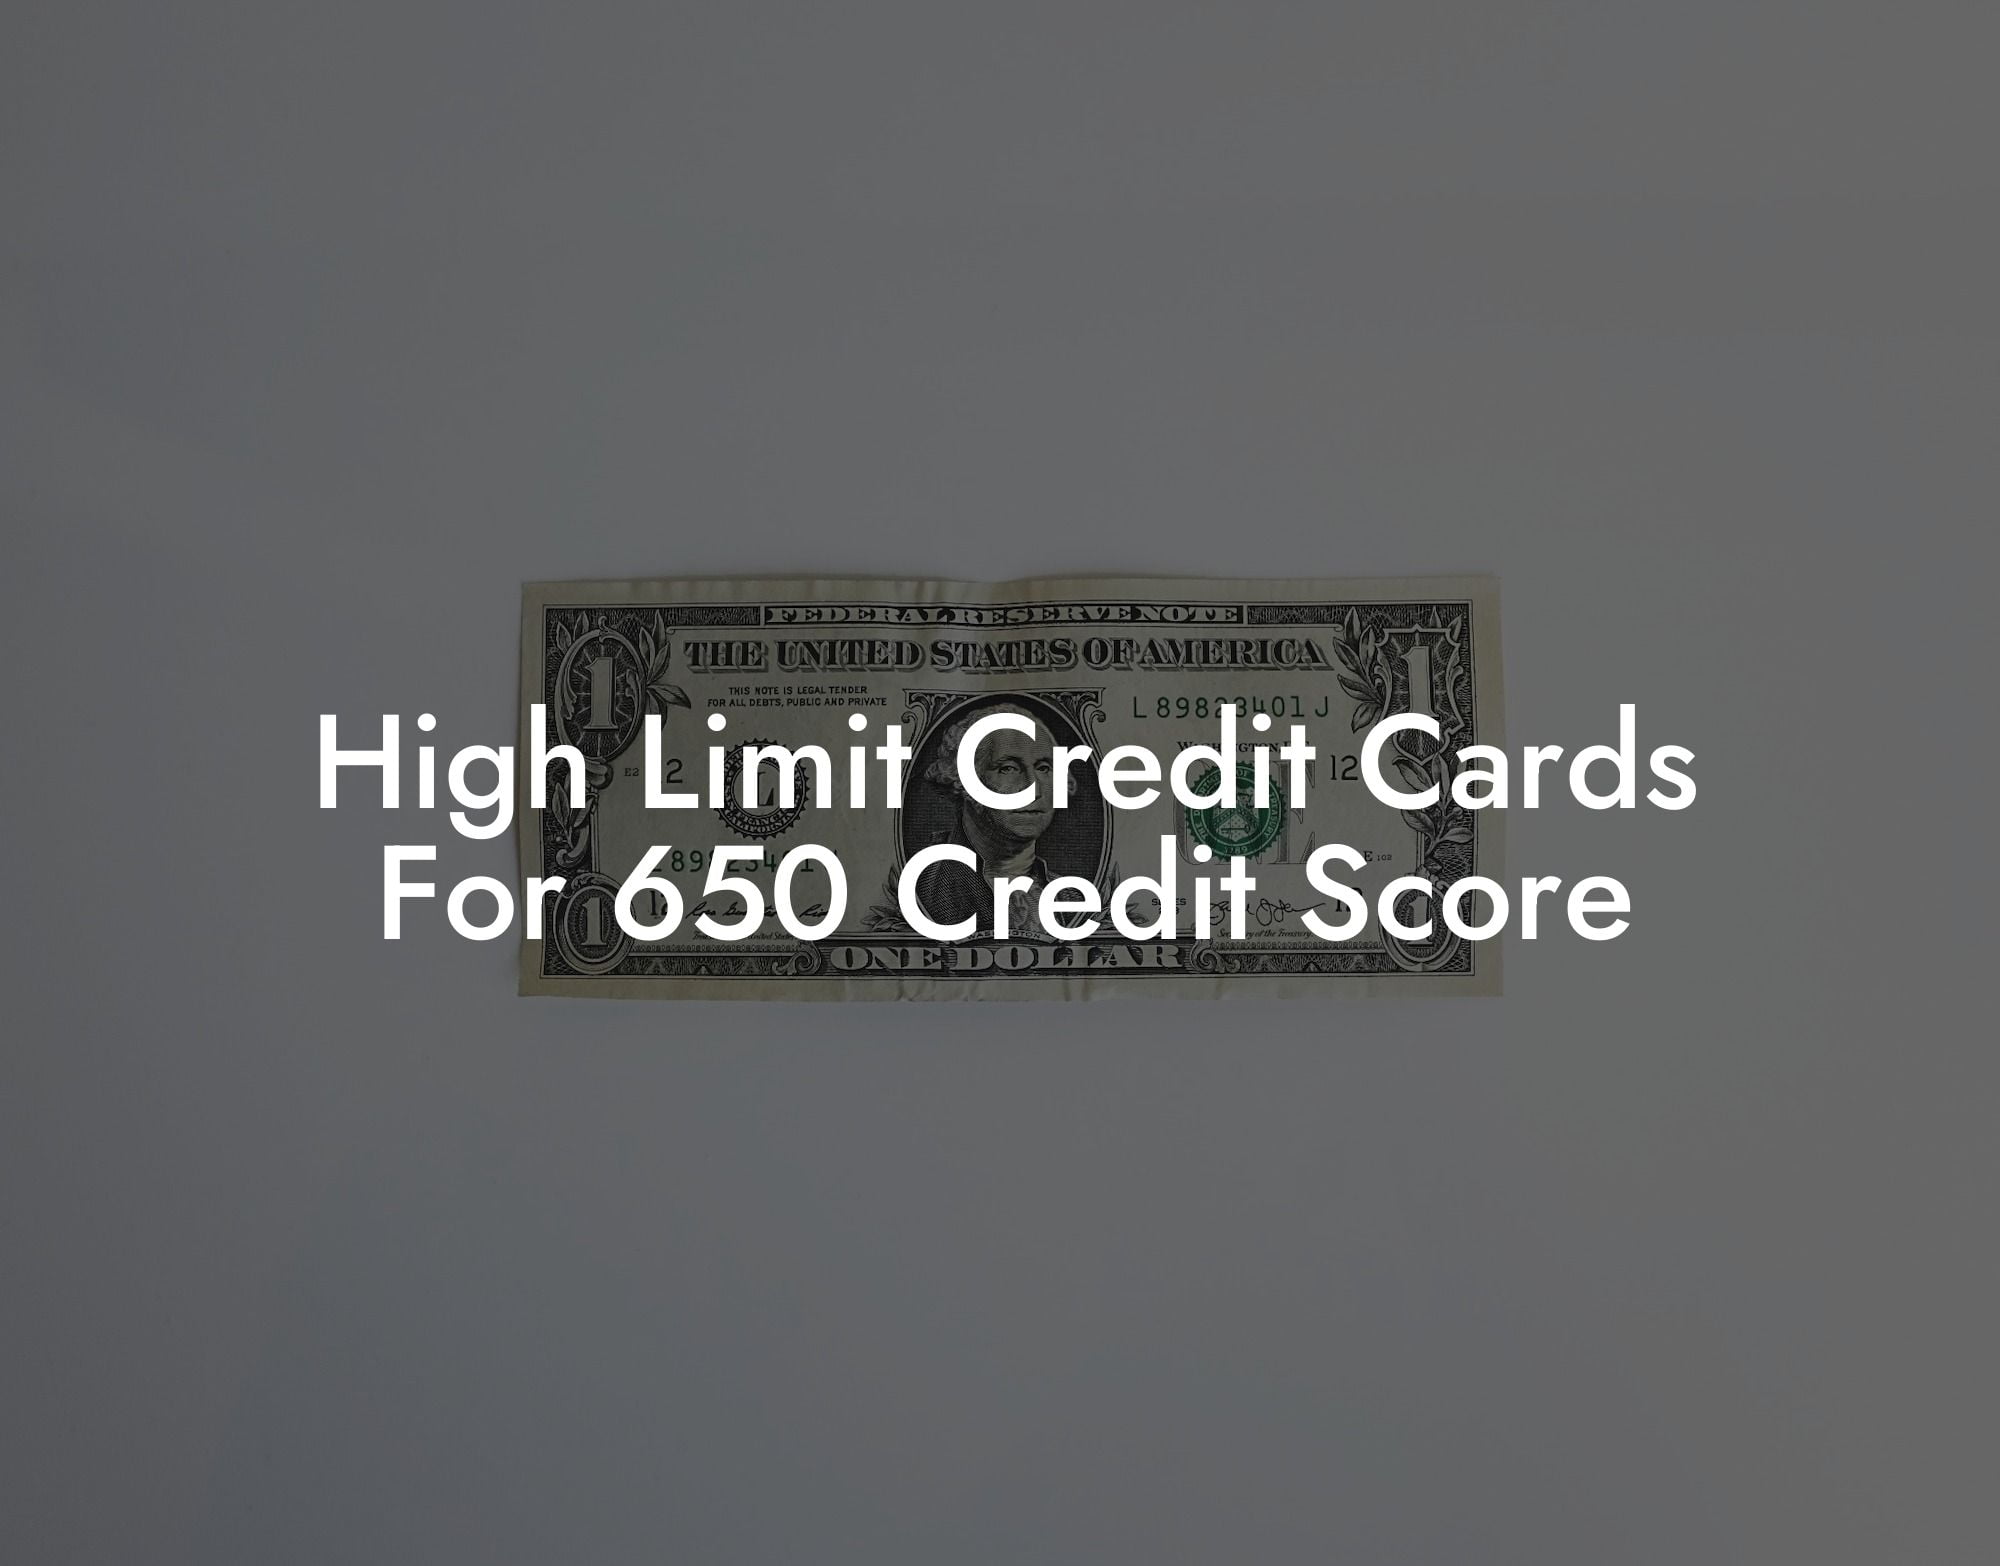 High Limit Credit Cards For 650 Credit Score